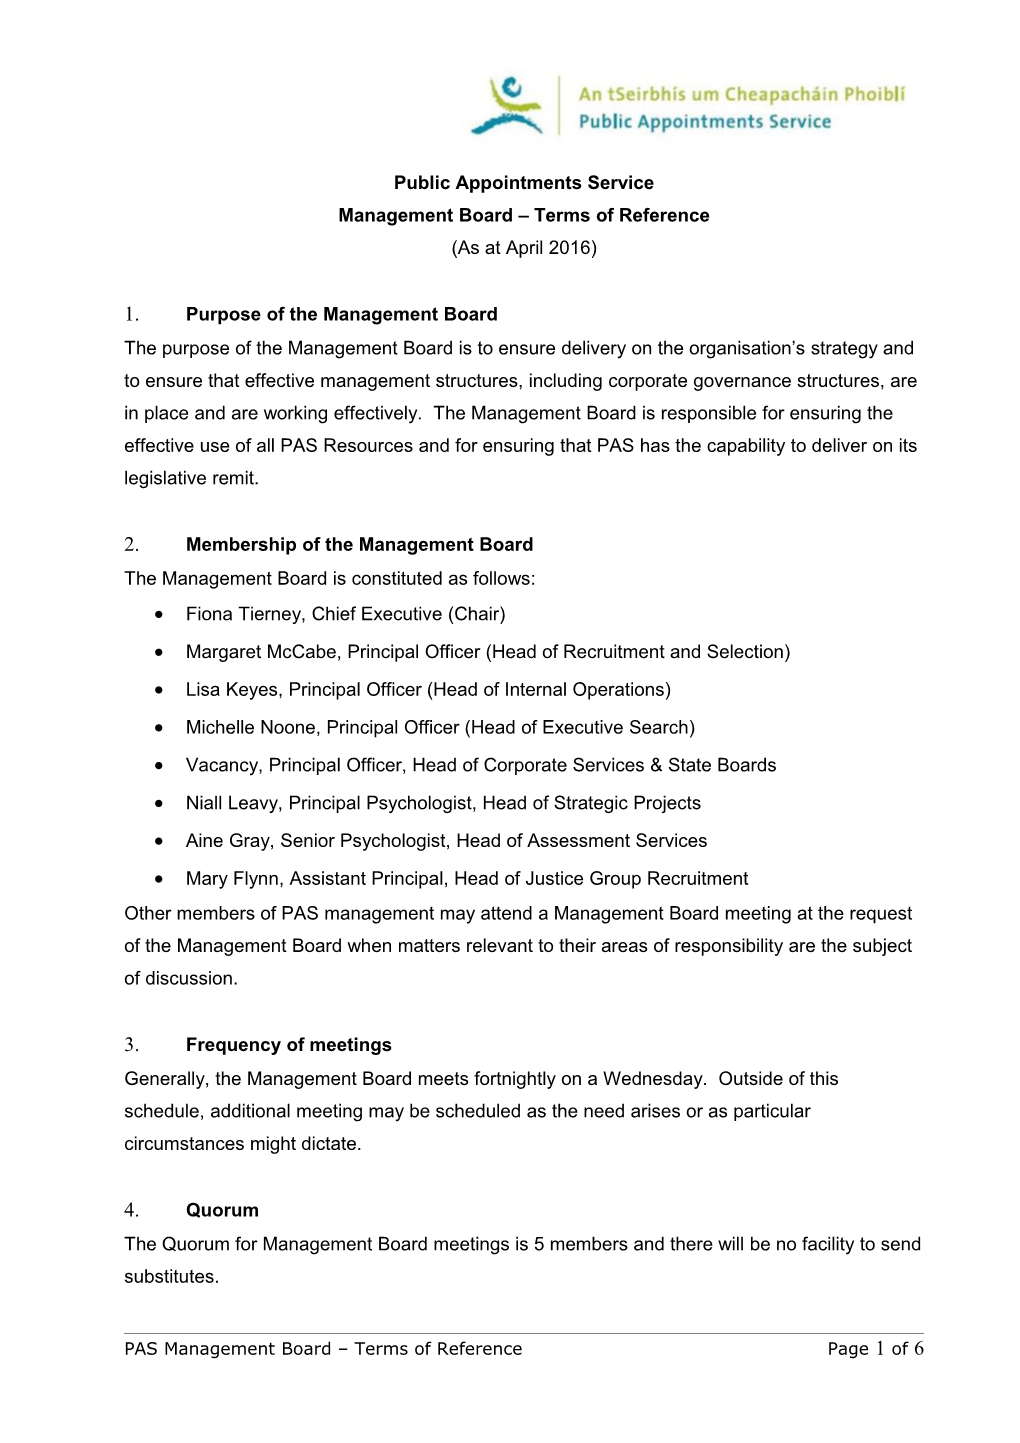 Management Board Terms of Reference